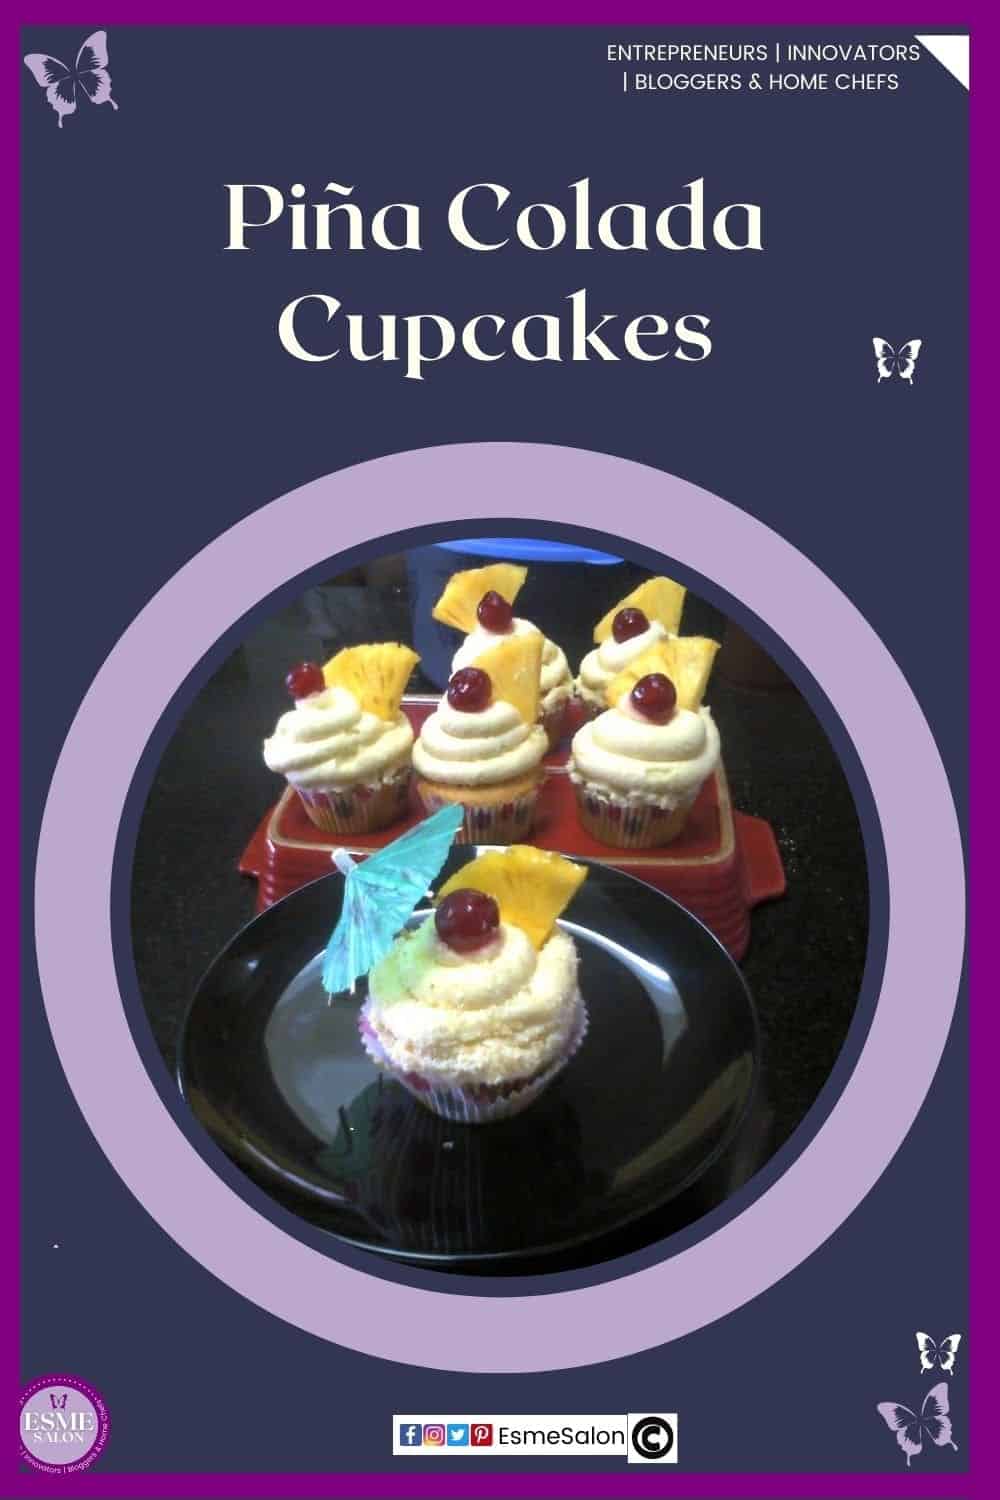 an image of 6 Piña Colada Cupcakes with a red cherry, piece of pineapple and one with a blue paper umbrella